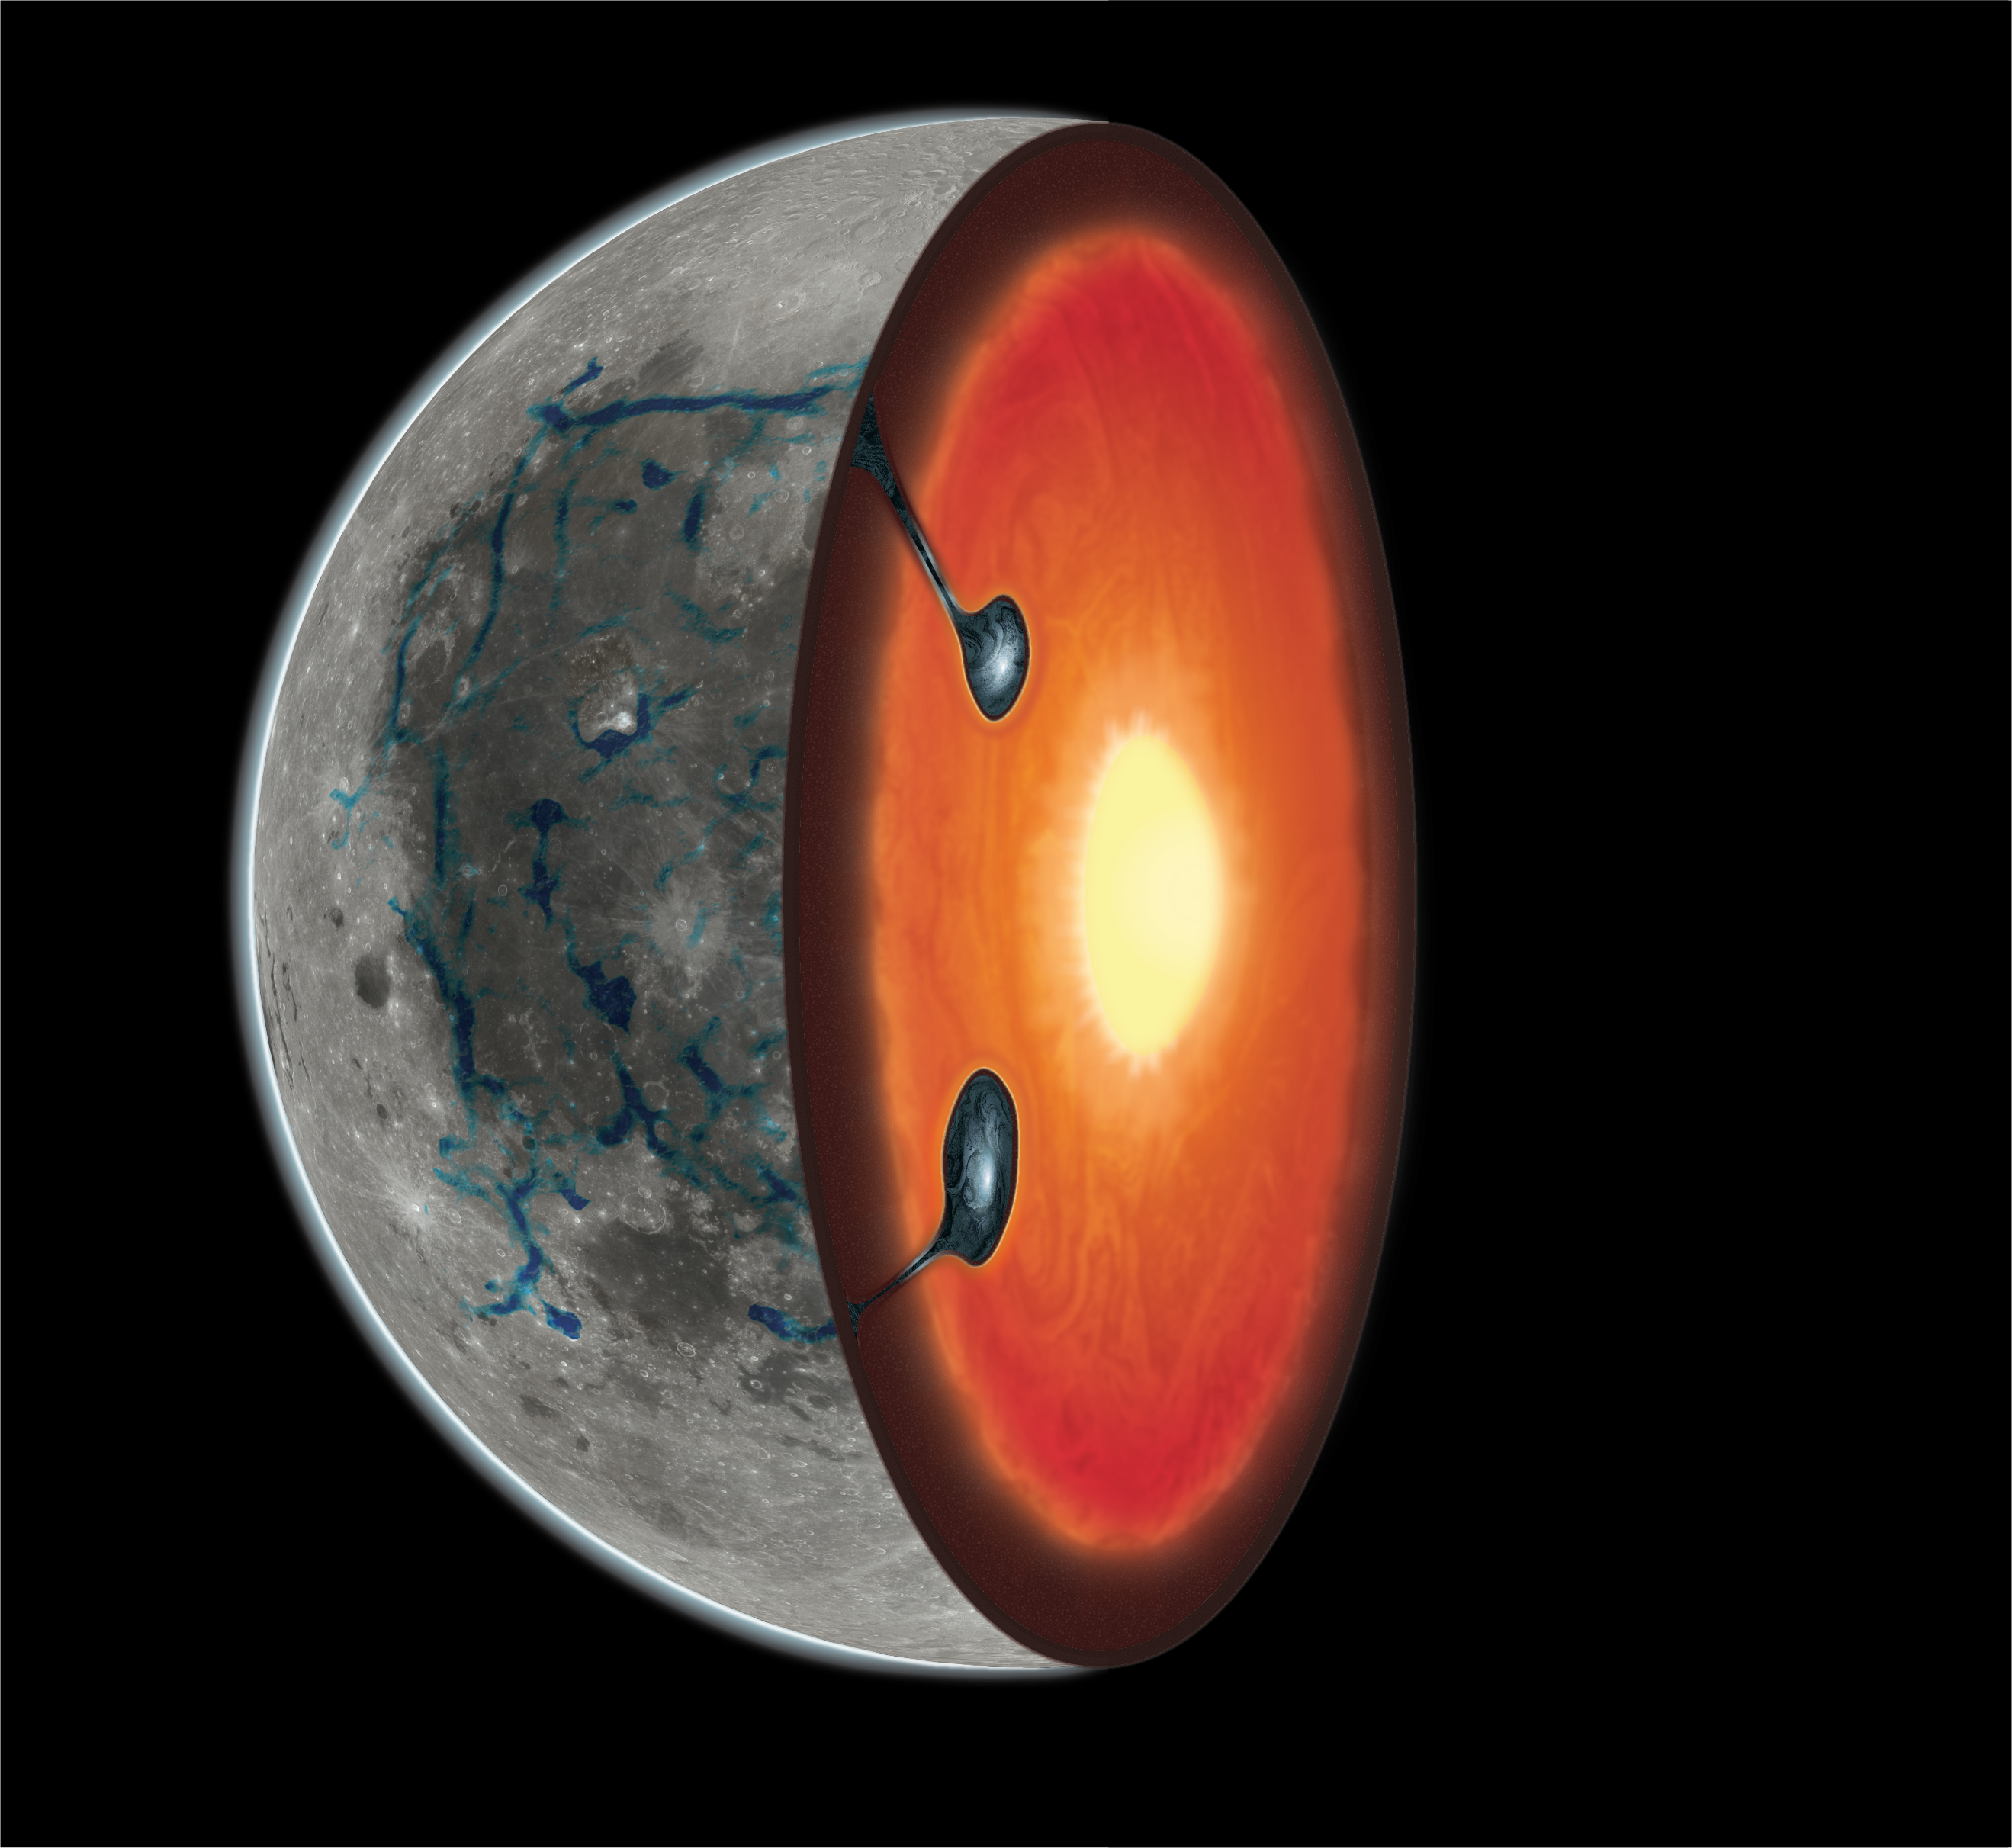 two ilmenite-bearing cumulate downwellings from lunar mantle overturn. The gravitational signature and location of the downwellings is shown as shaded blue.